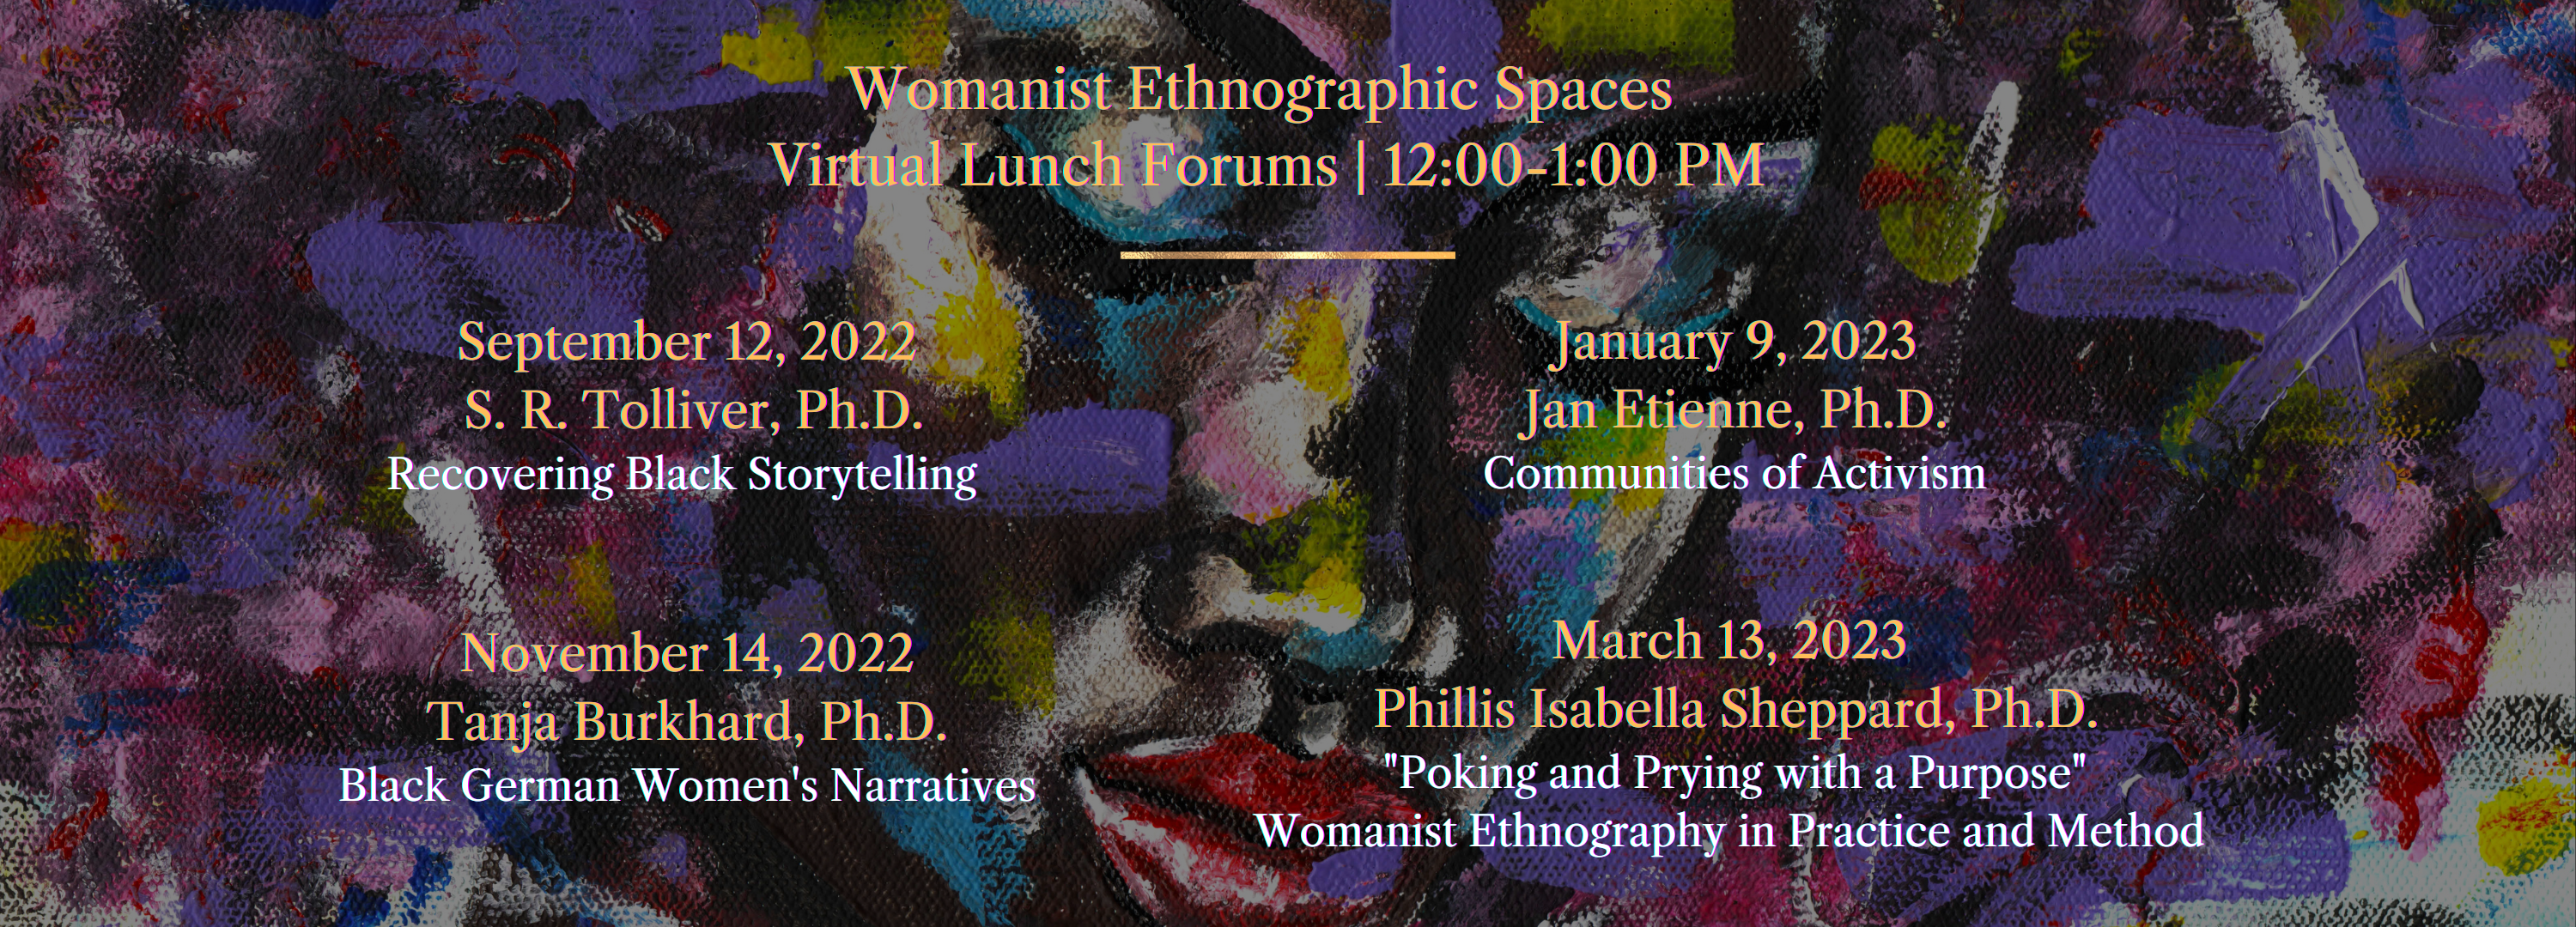 Womanist Ethnographic Spaces   Virtual Lunch Forums | 12:00-1:00 PM